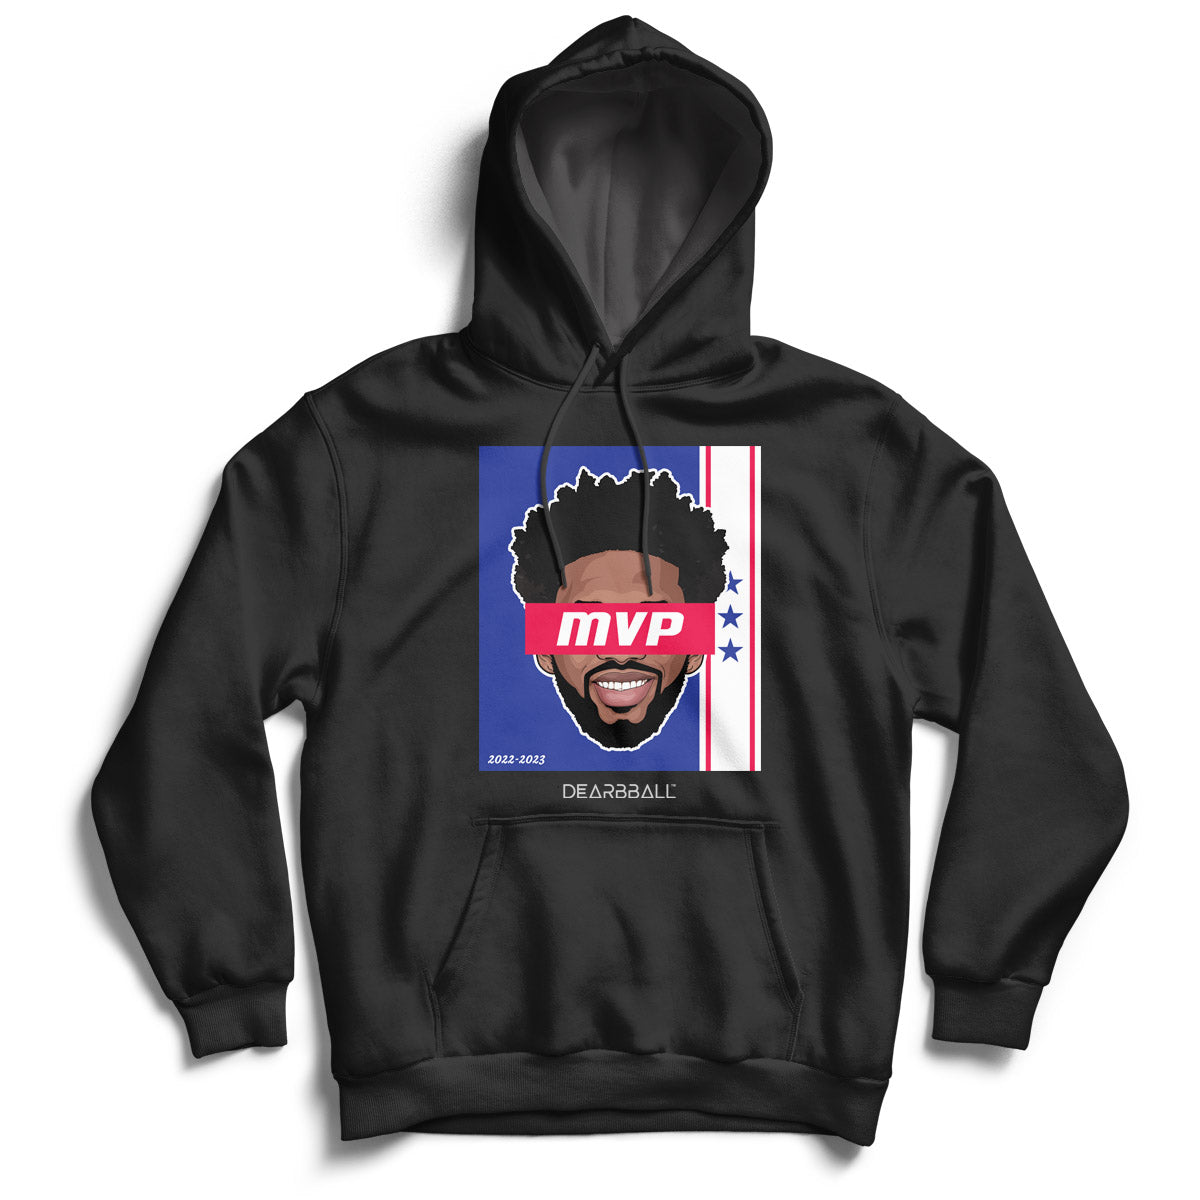 Hoodie-Joel-Embiid-Philadelphia-Sixers-Dearbball-clothes-brand-france